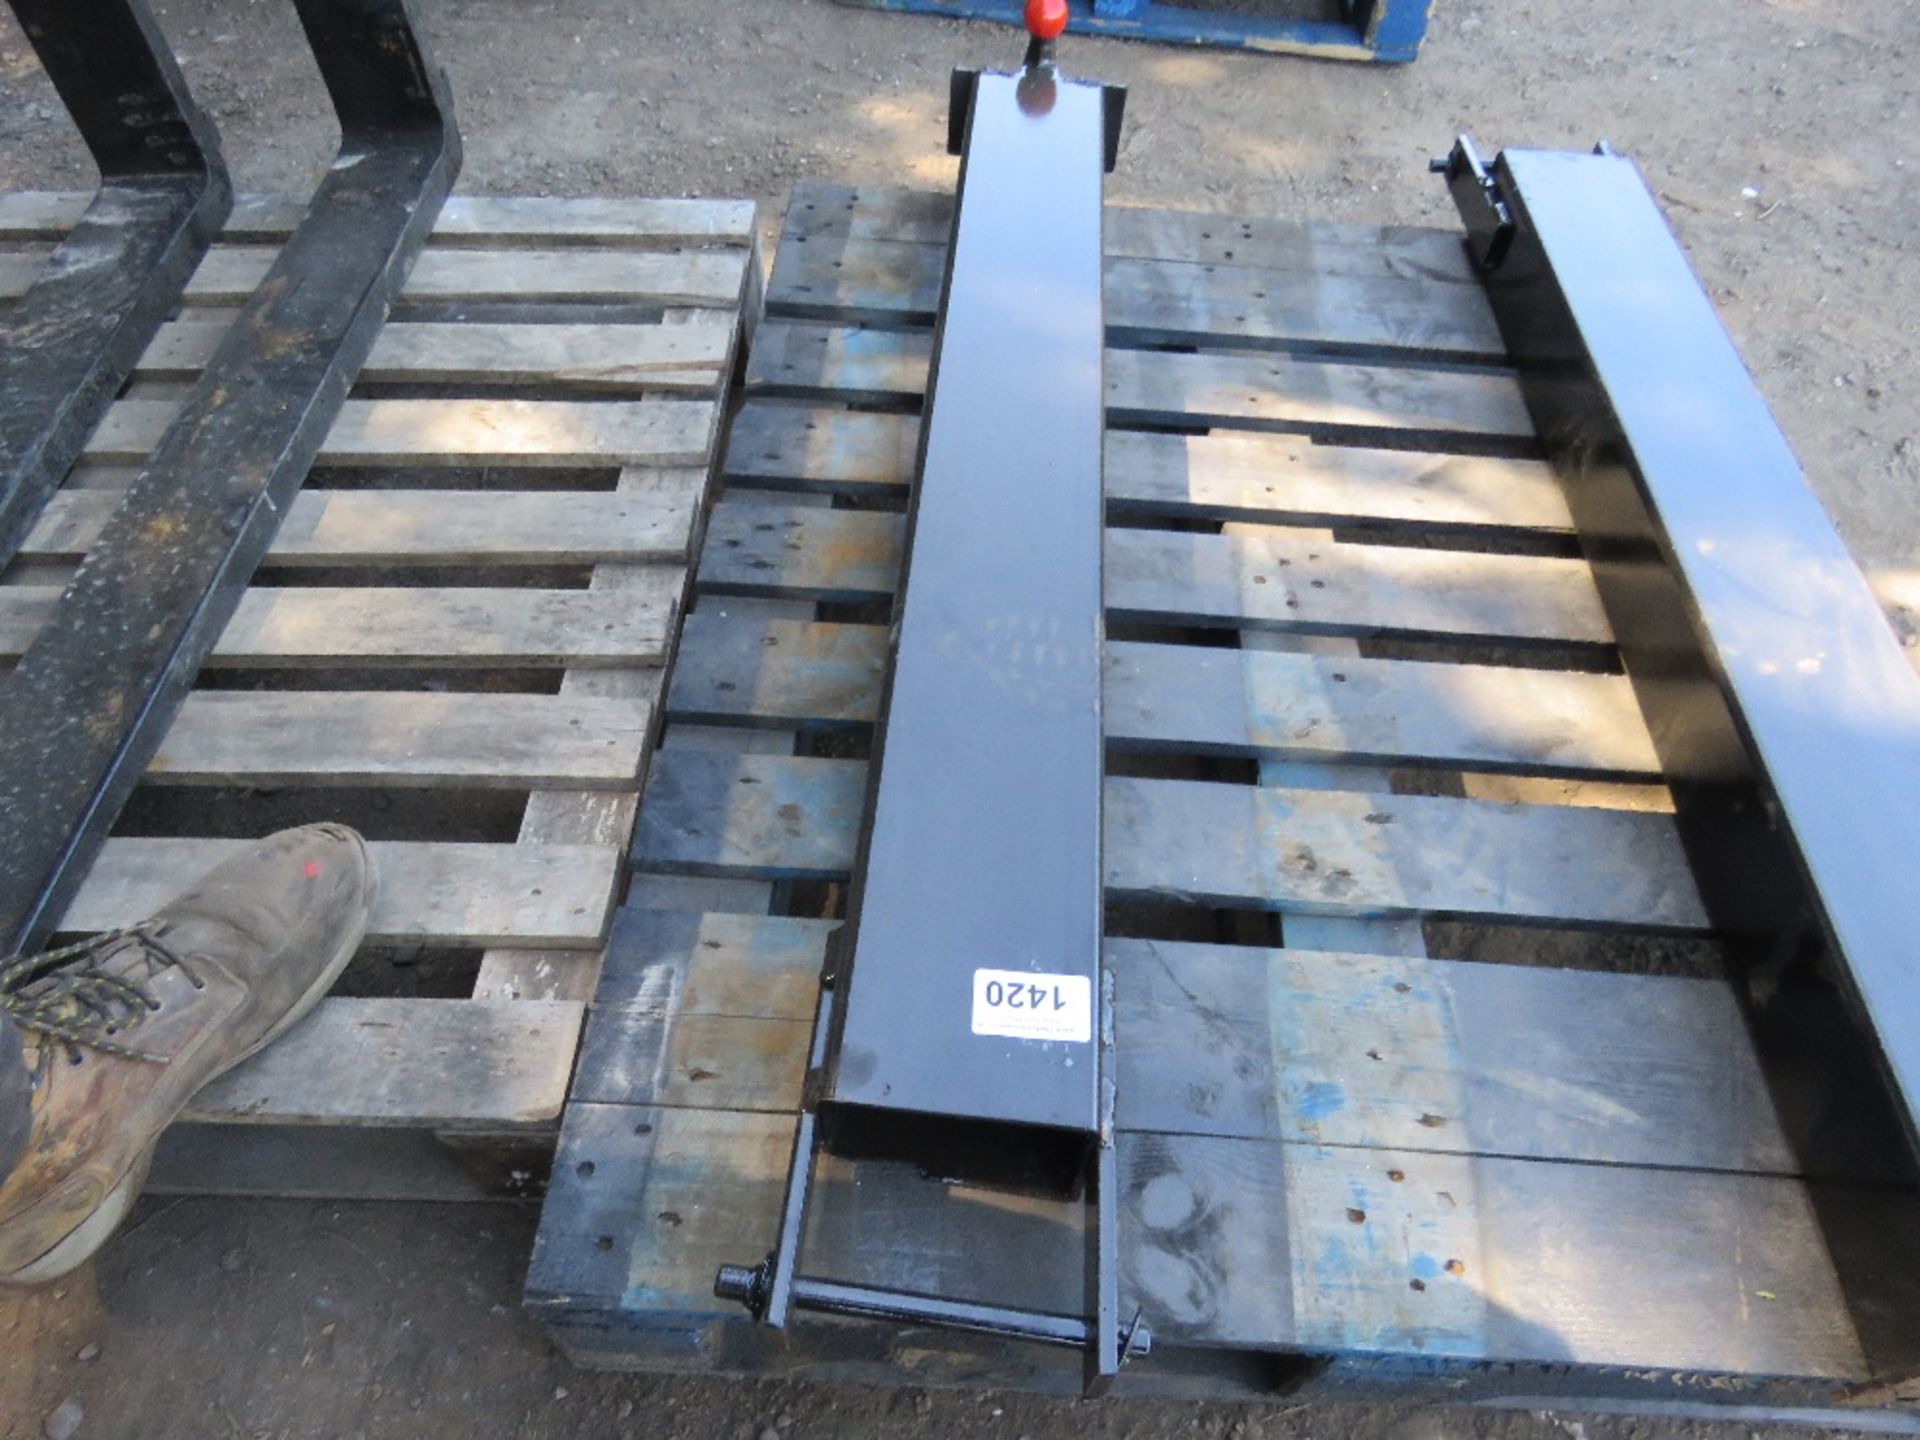 BALL HITCH UNIT FOR FORKLIFT TINE, 4FT LENGTH APPROX. - Image 2 of 2